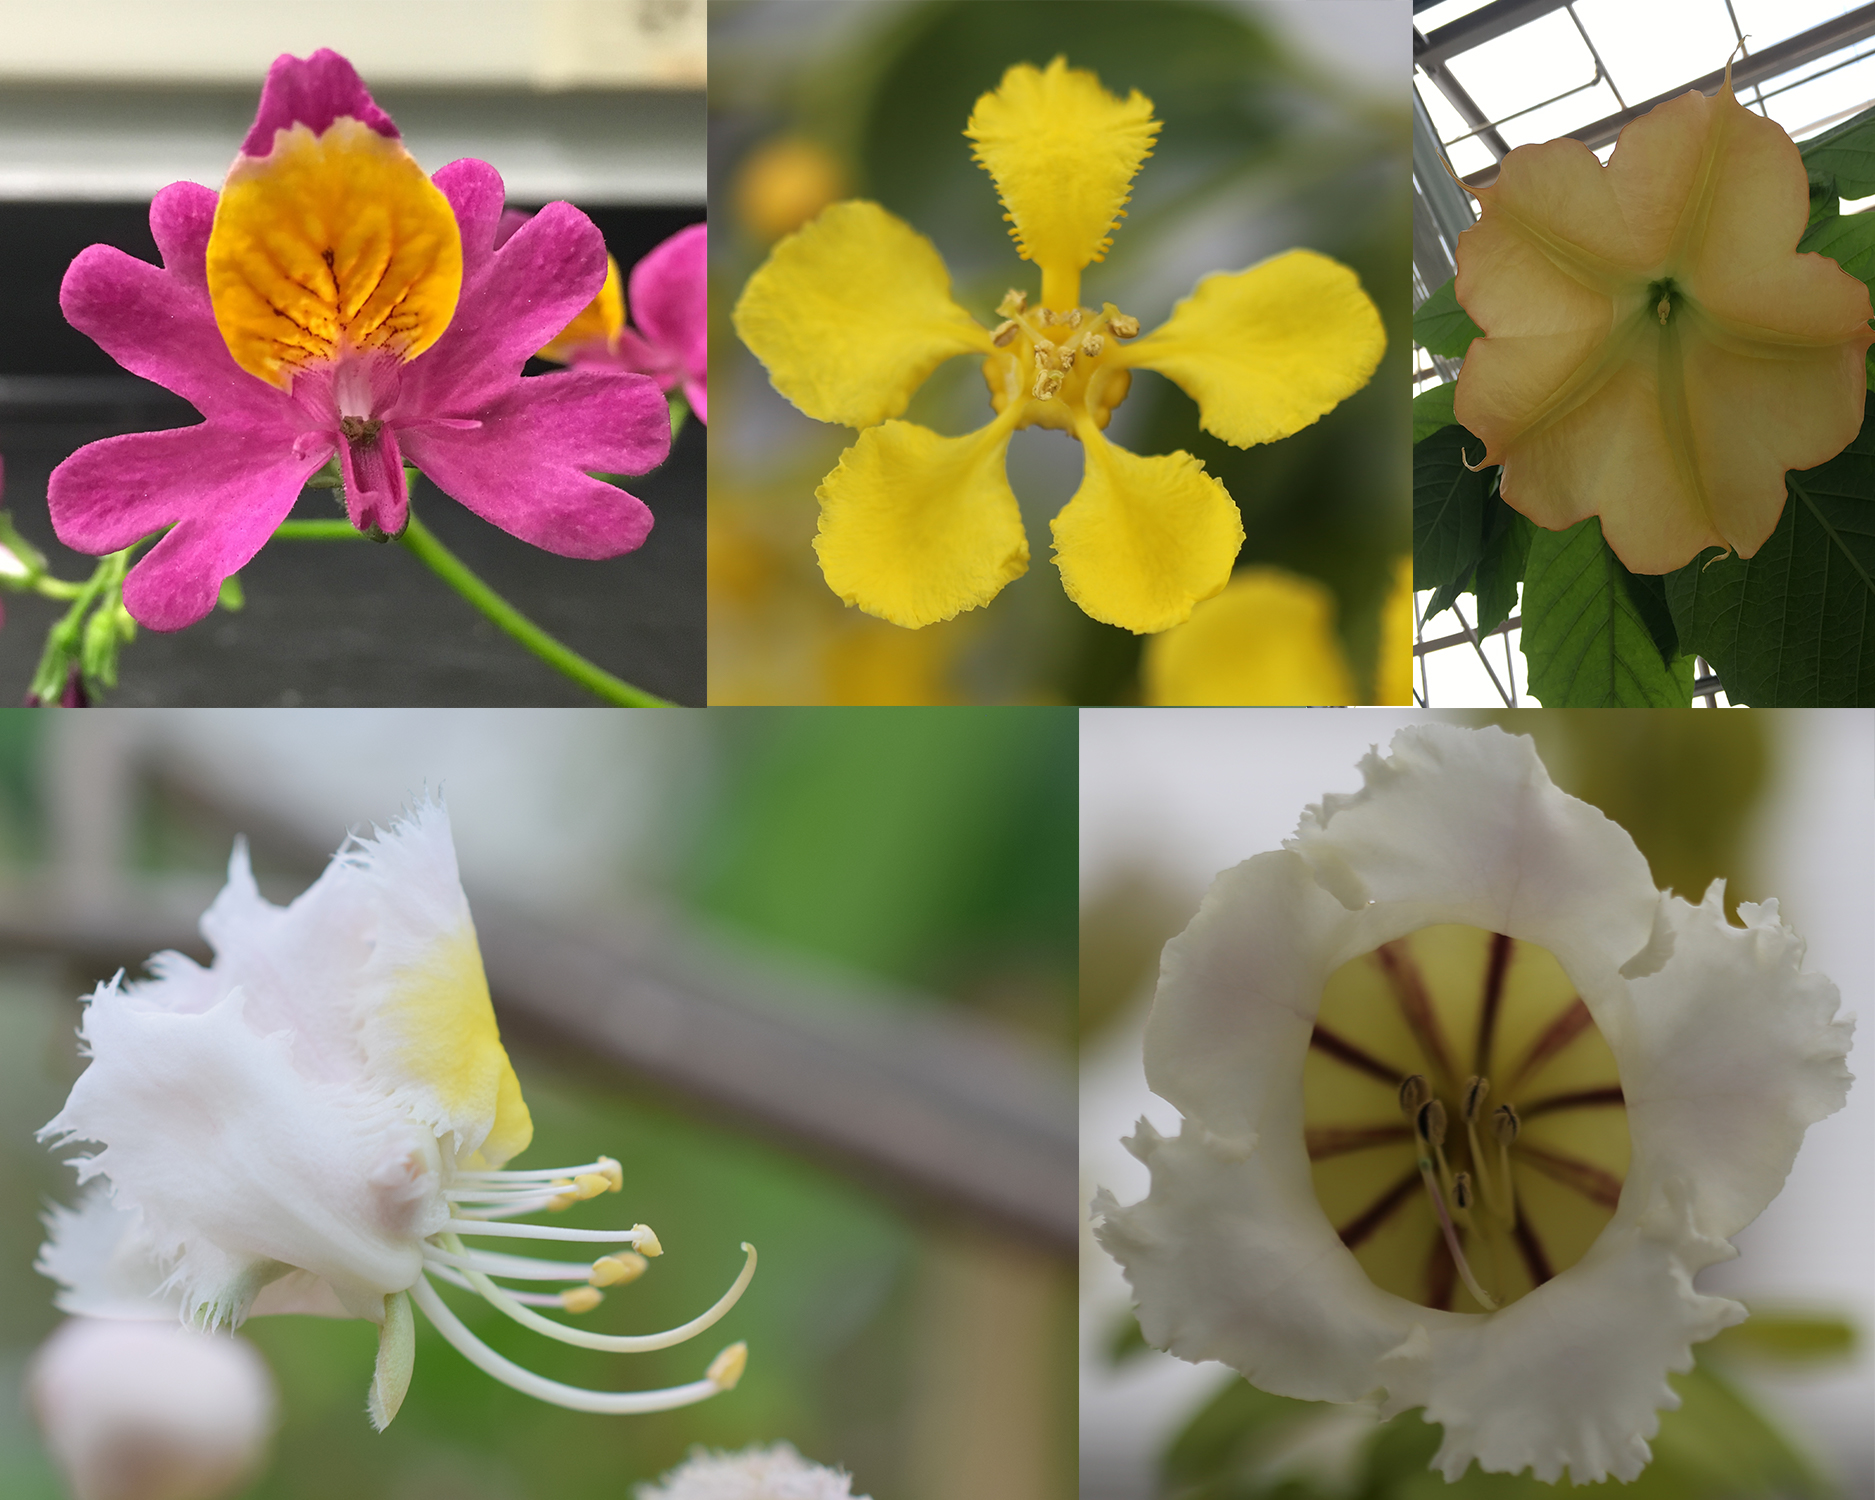 Sample flowers from Solanaceae and Malpighiceae